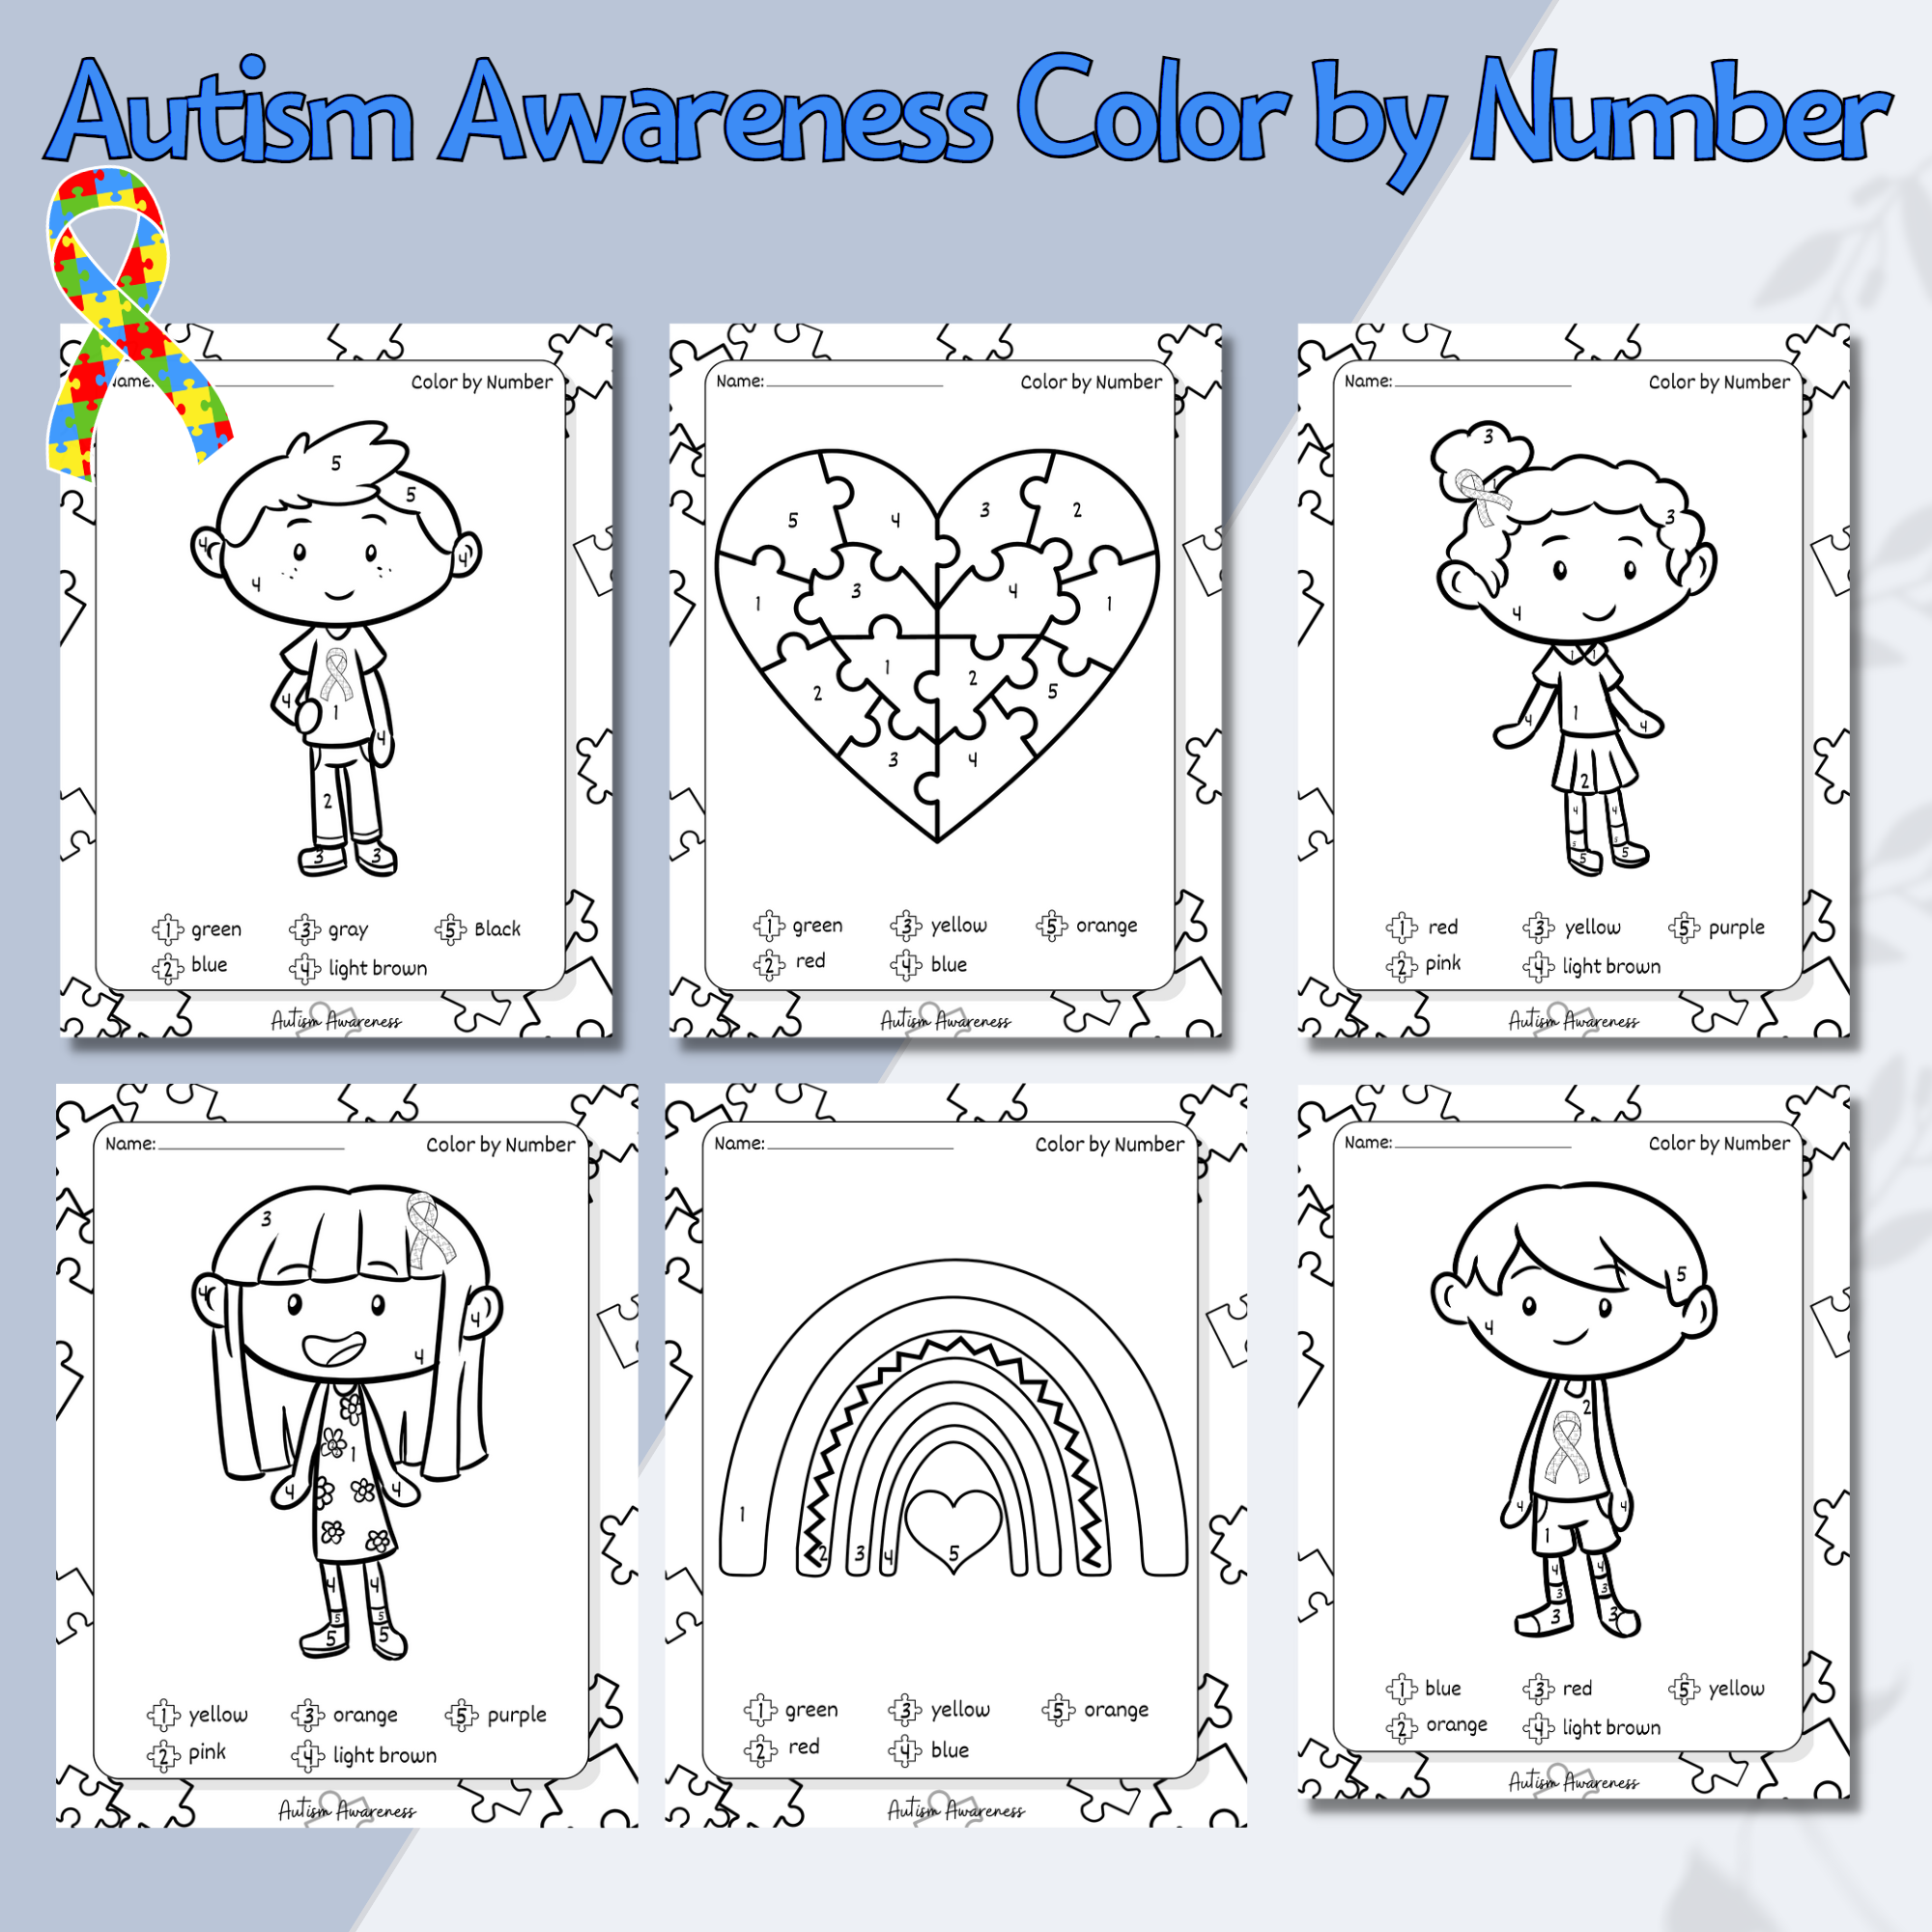 Autism awareness color by number coloring pages neurodiversity spectrum disorder kids activity made by teachers